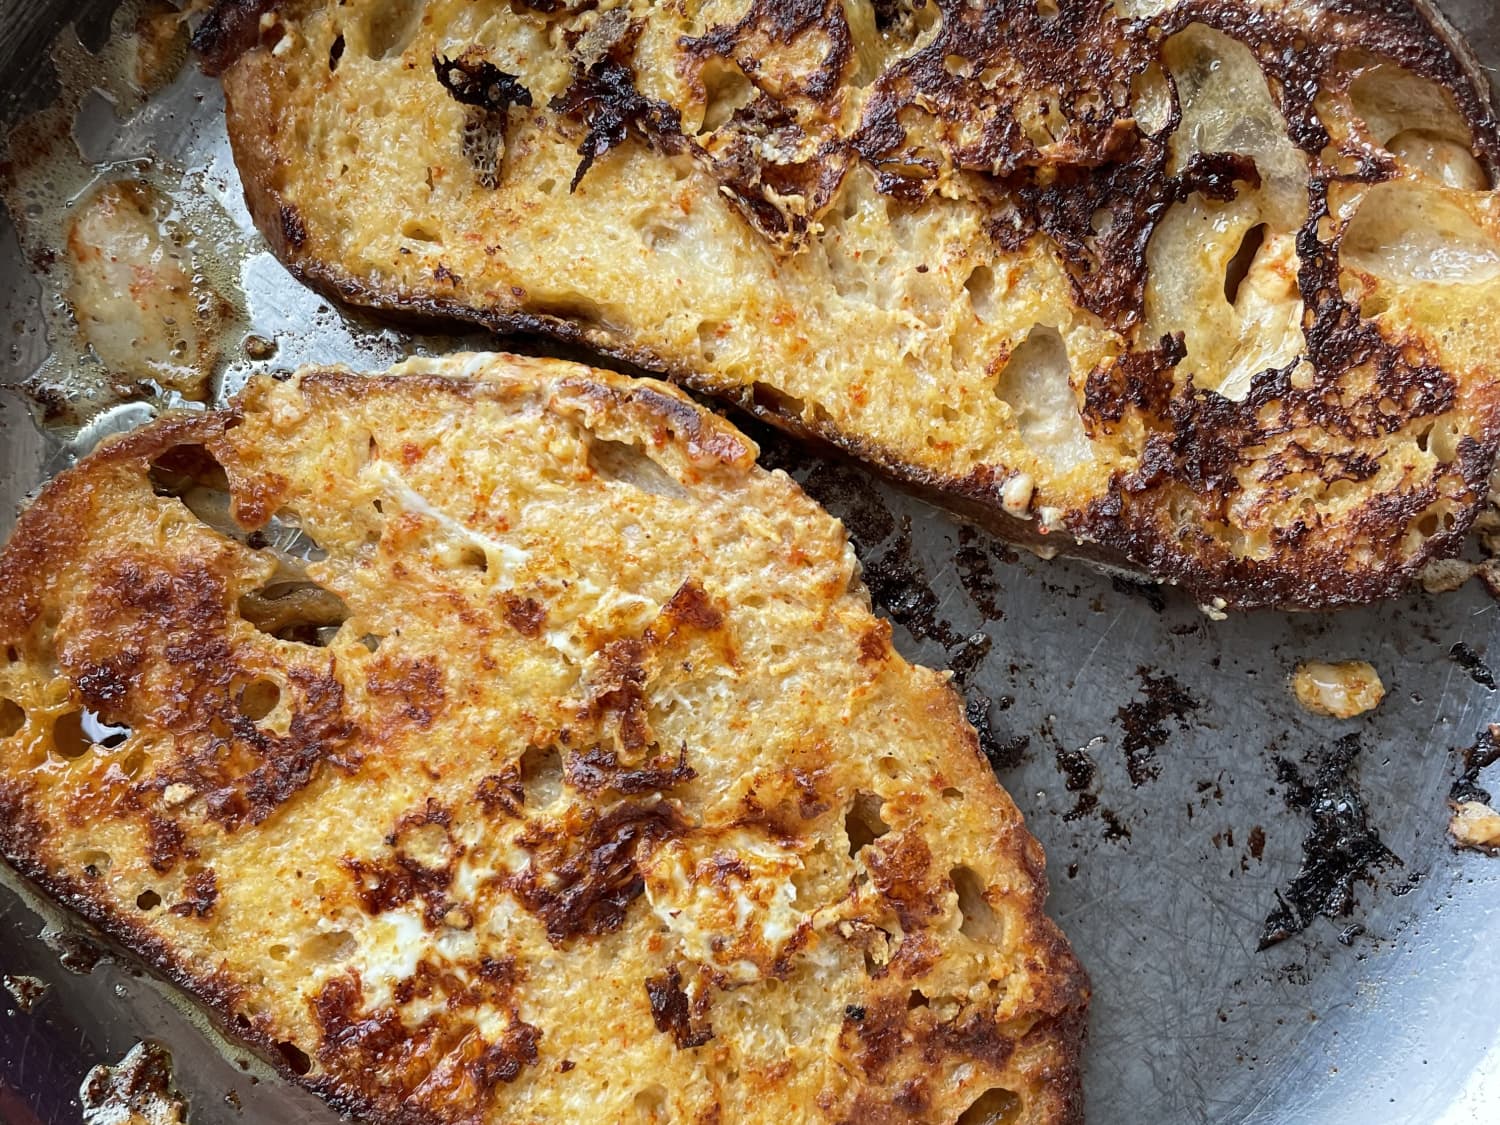 Parmesan gives a sexy adult twist to the traditional French toast!